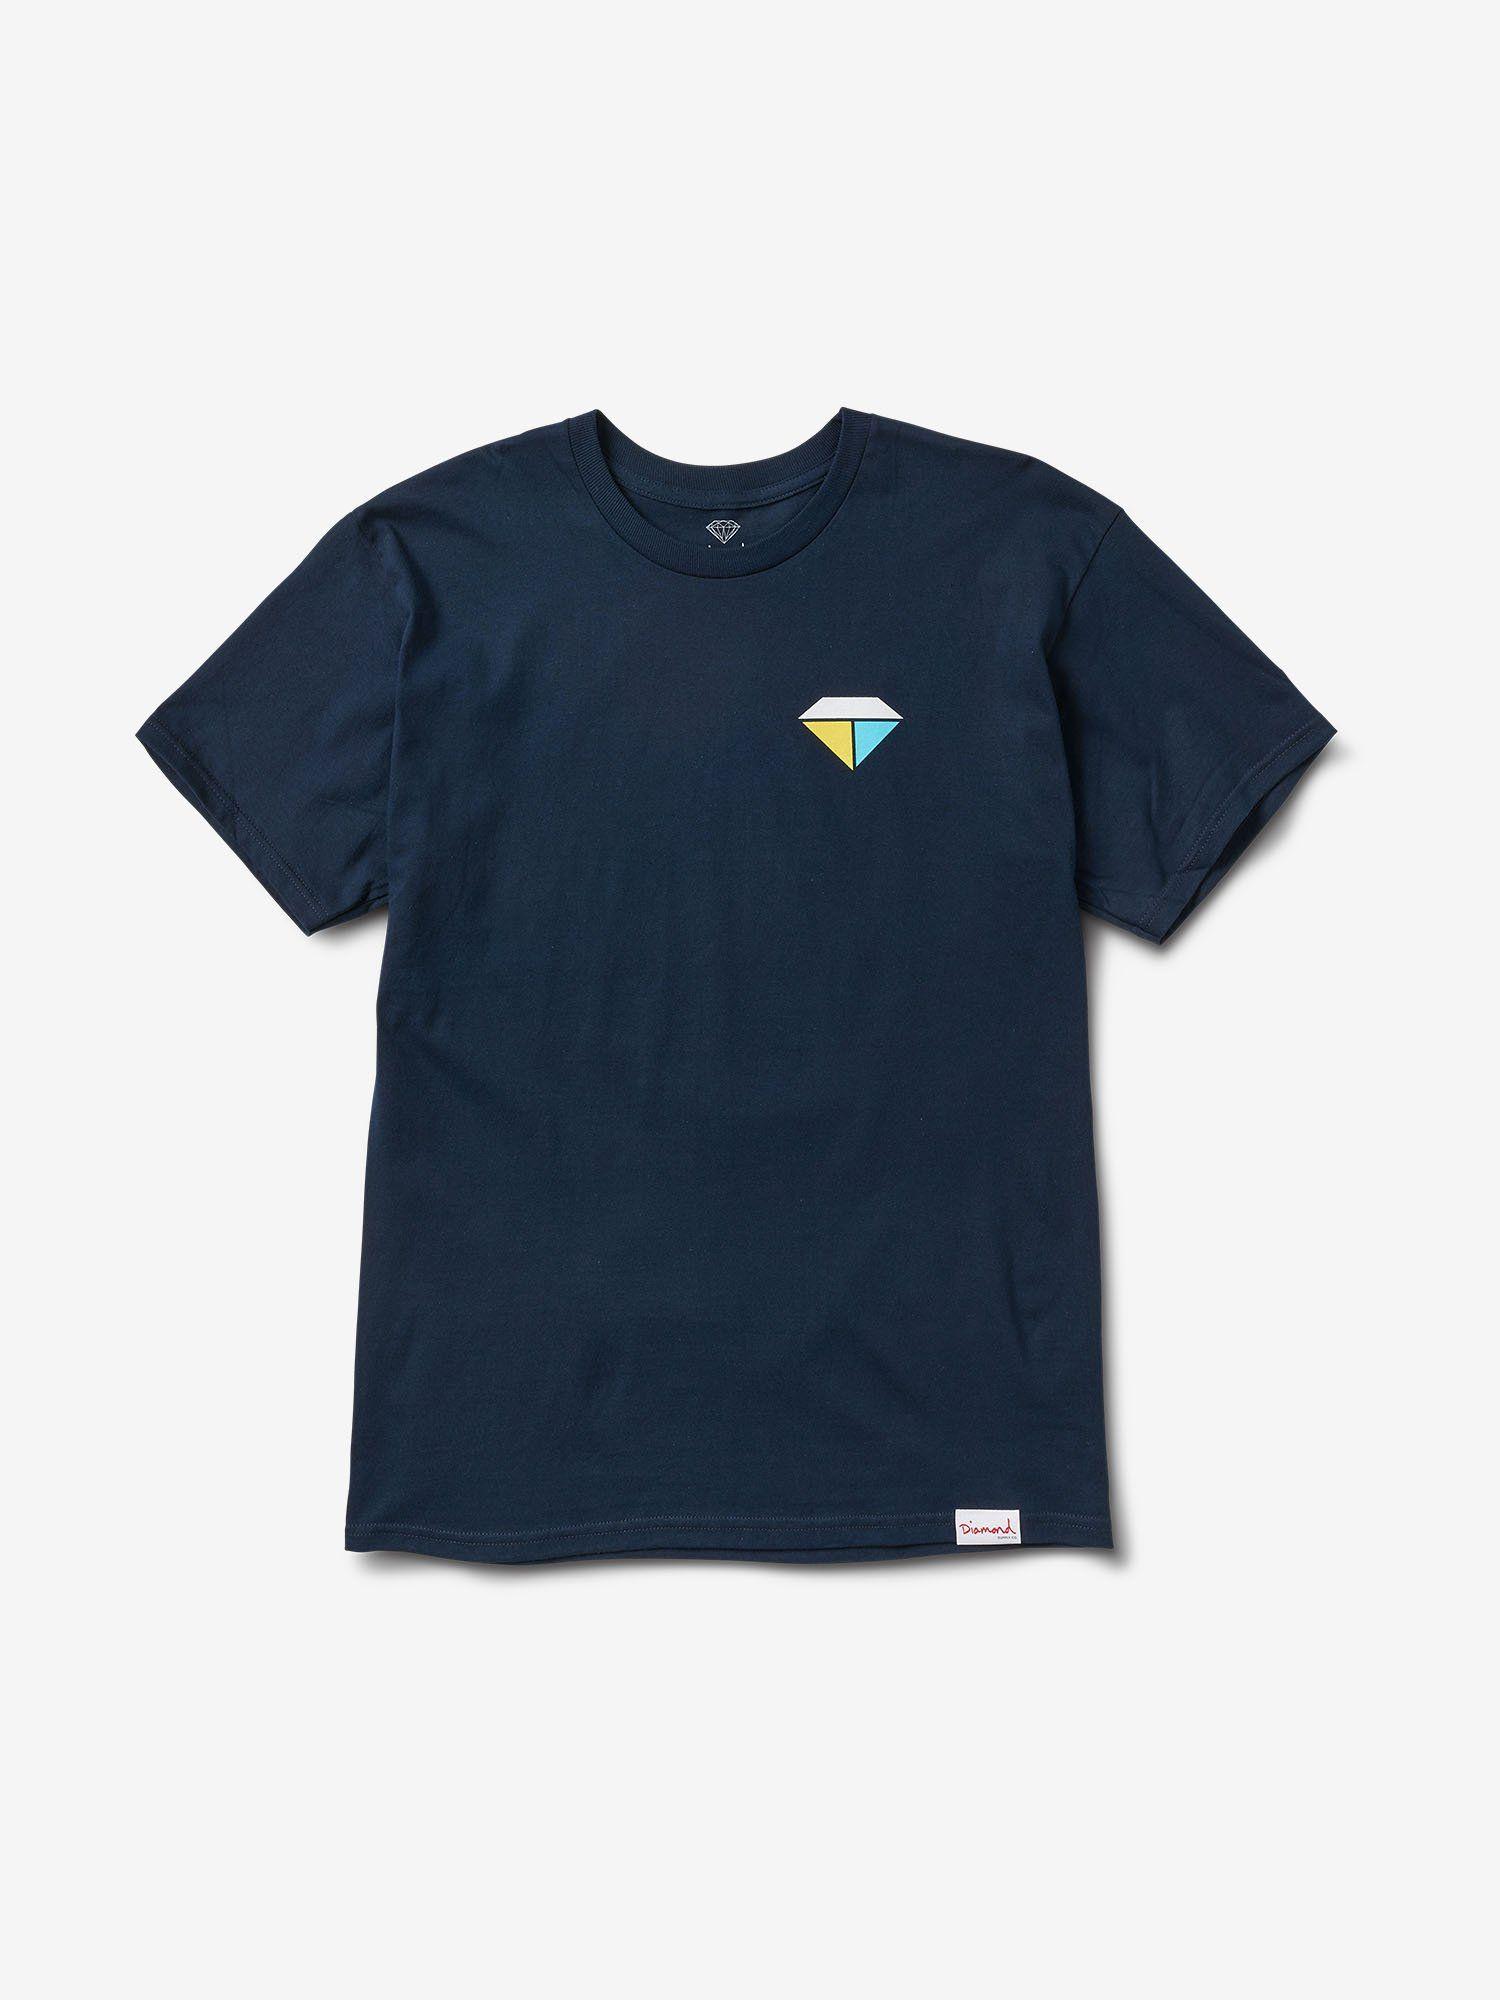 Dimond Co Logo - Bolts and Boats Tee Supply Co